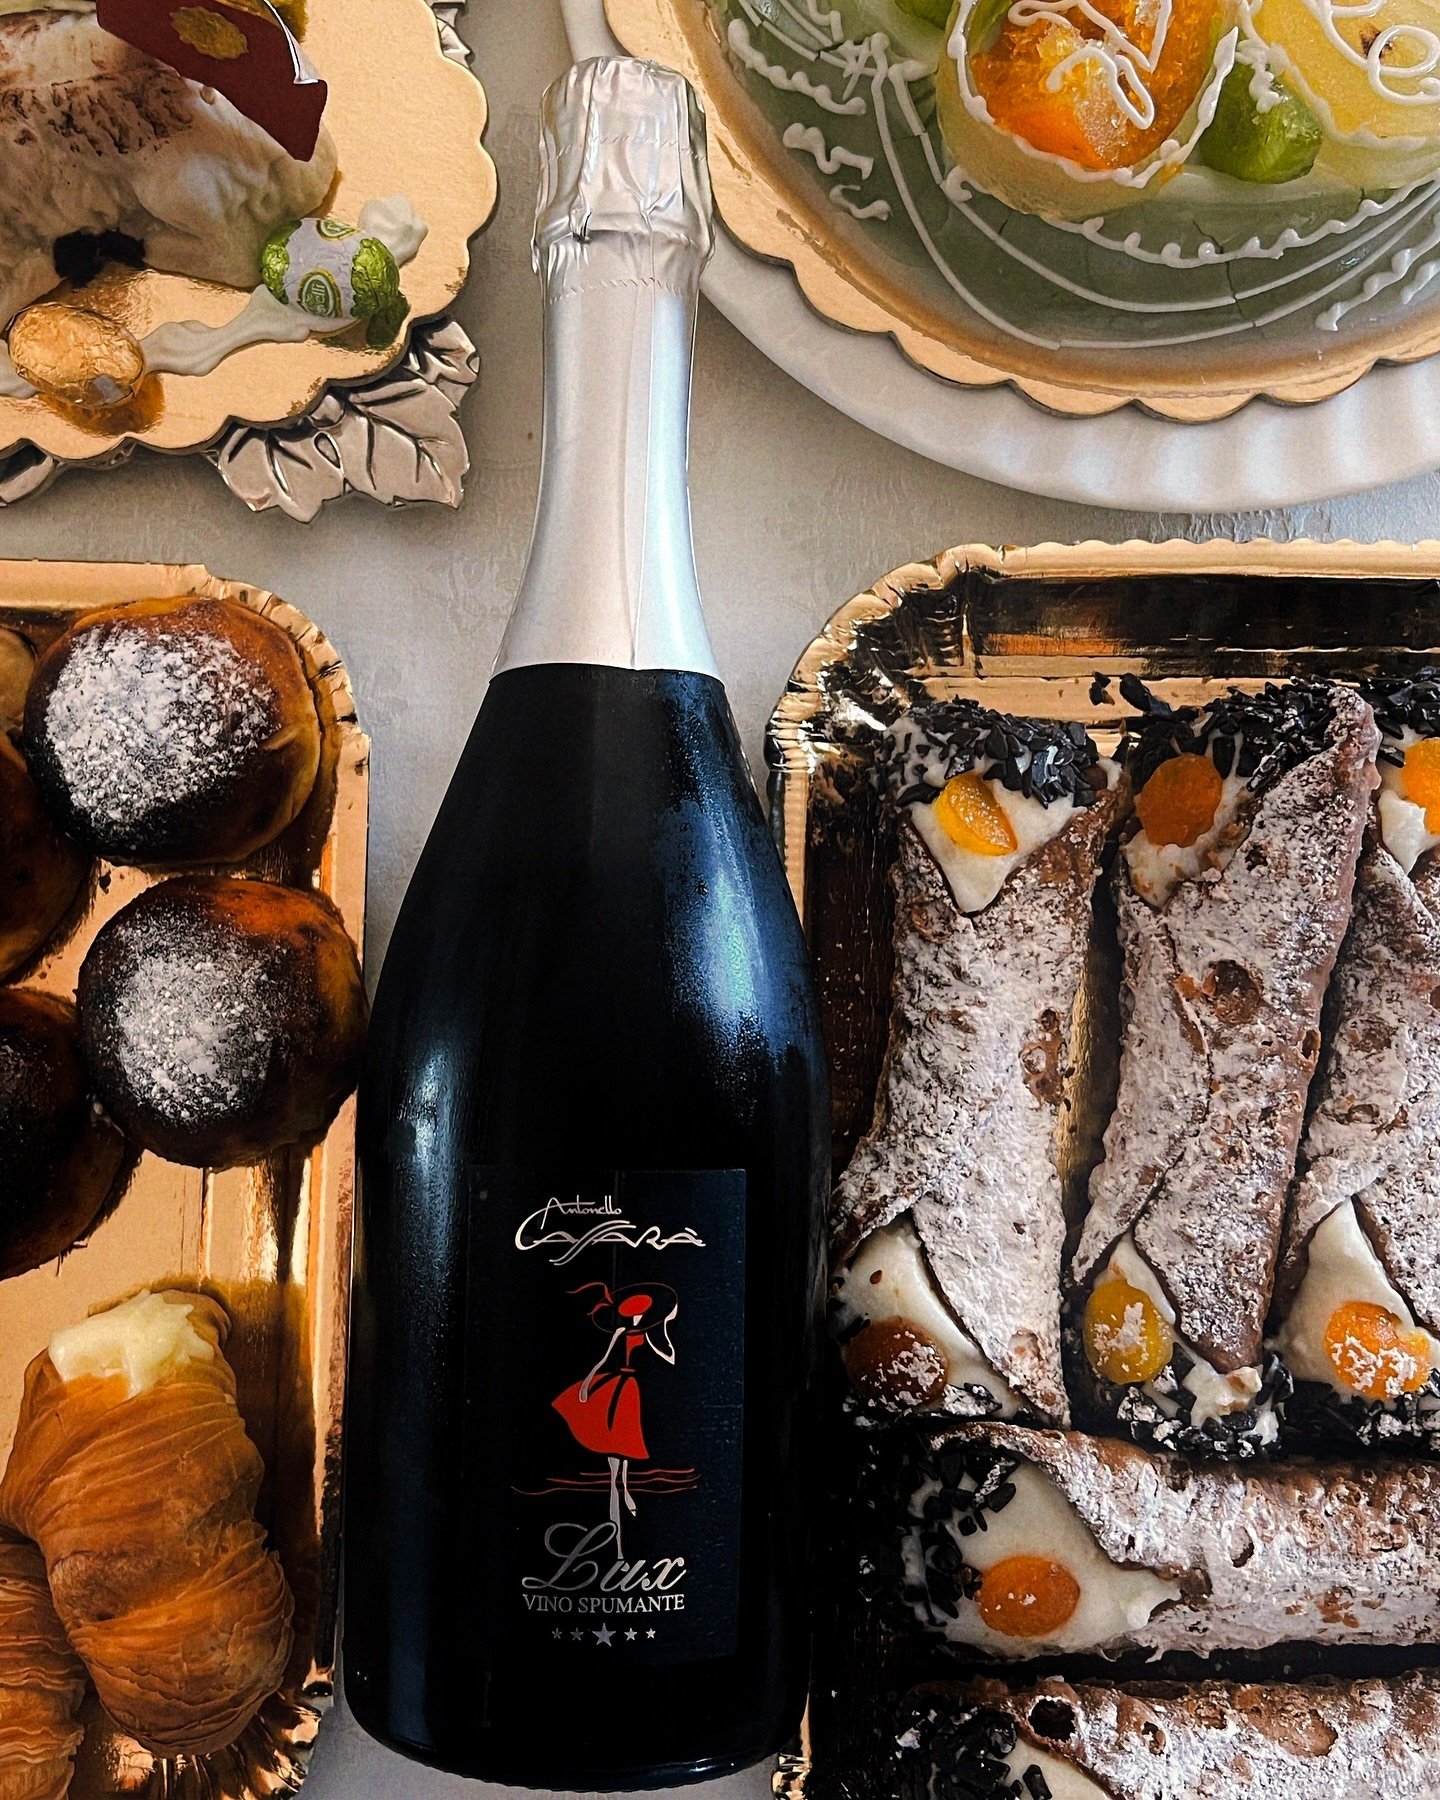 Experience the light, fruity essence of Spumante Lux🥂
Pair it with traditional Sicilian treats like cannoli filled with ricotta and cassata siciliana adorned with candied fruits. A charming duo✨